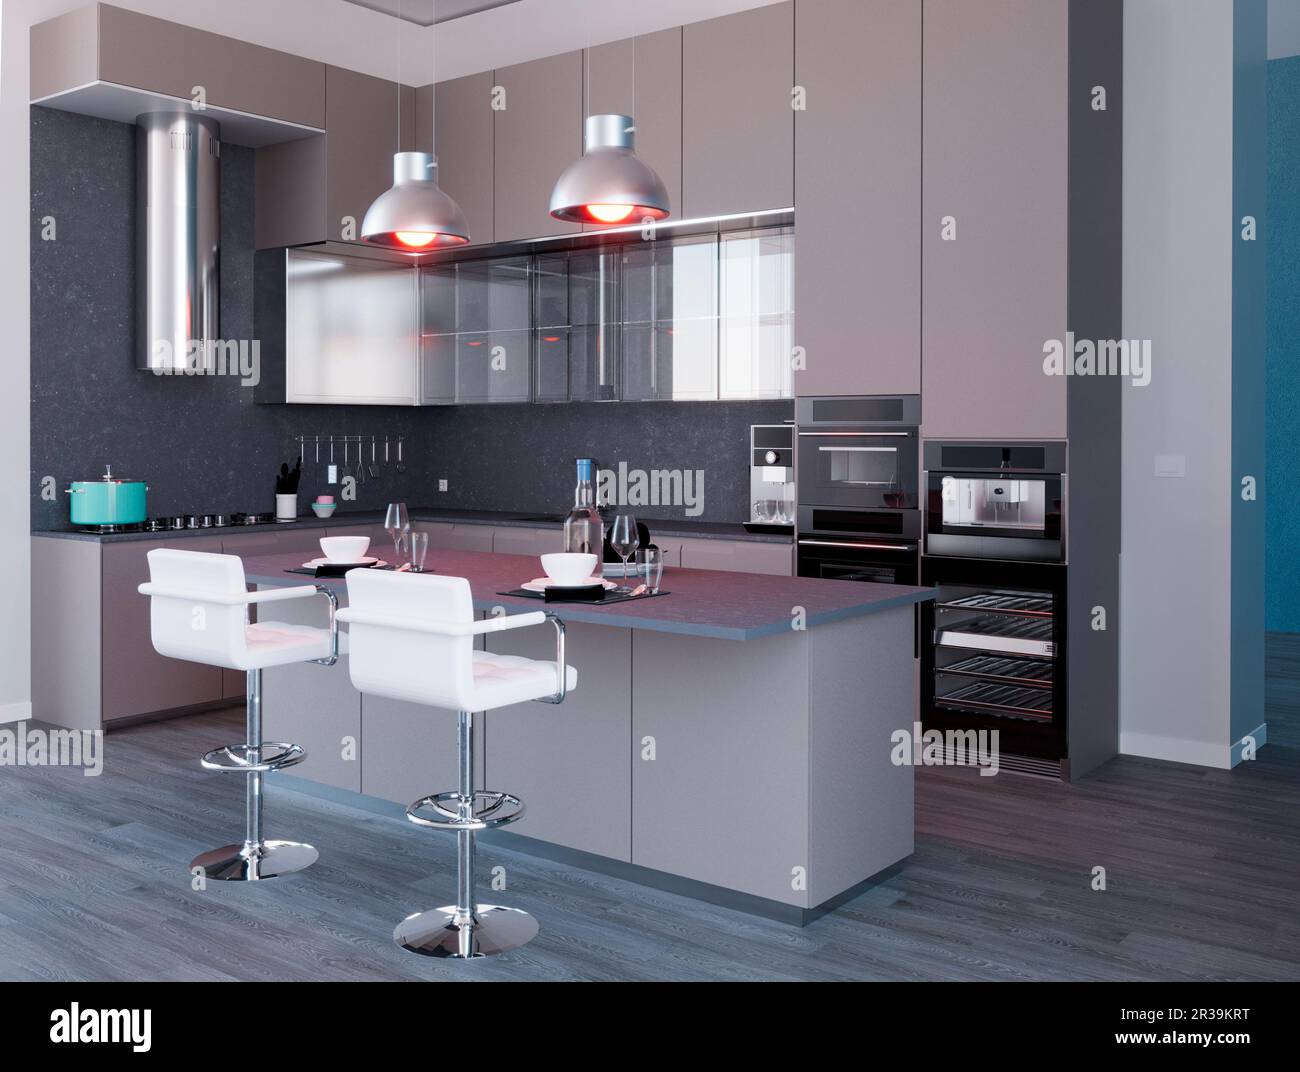 View of a modern kitchen interior furniture. Stove and furniture with table and chairs. Interior architecture, project for a modern and kitchen Stock Photo